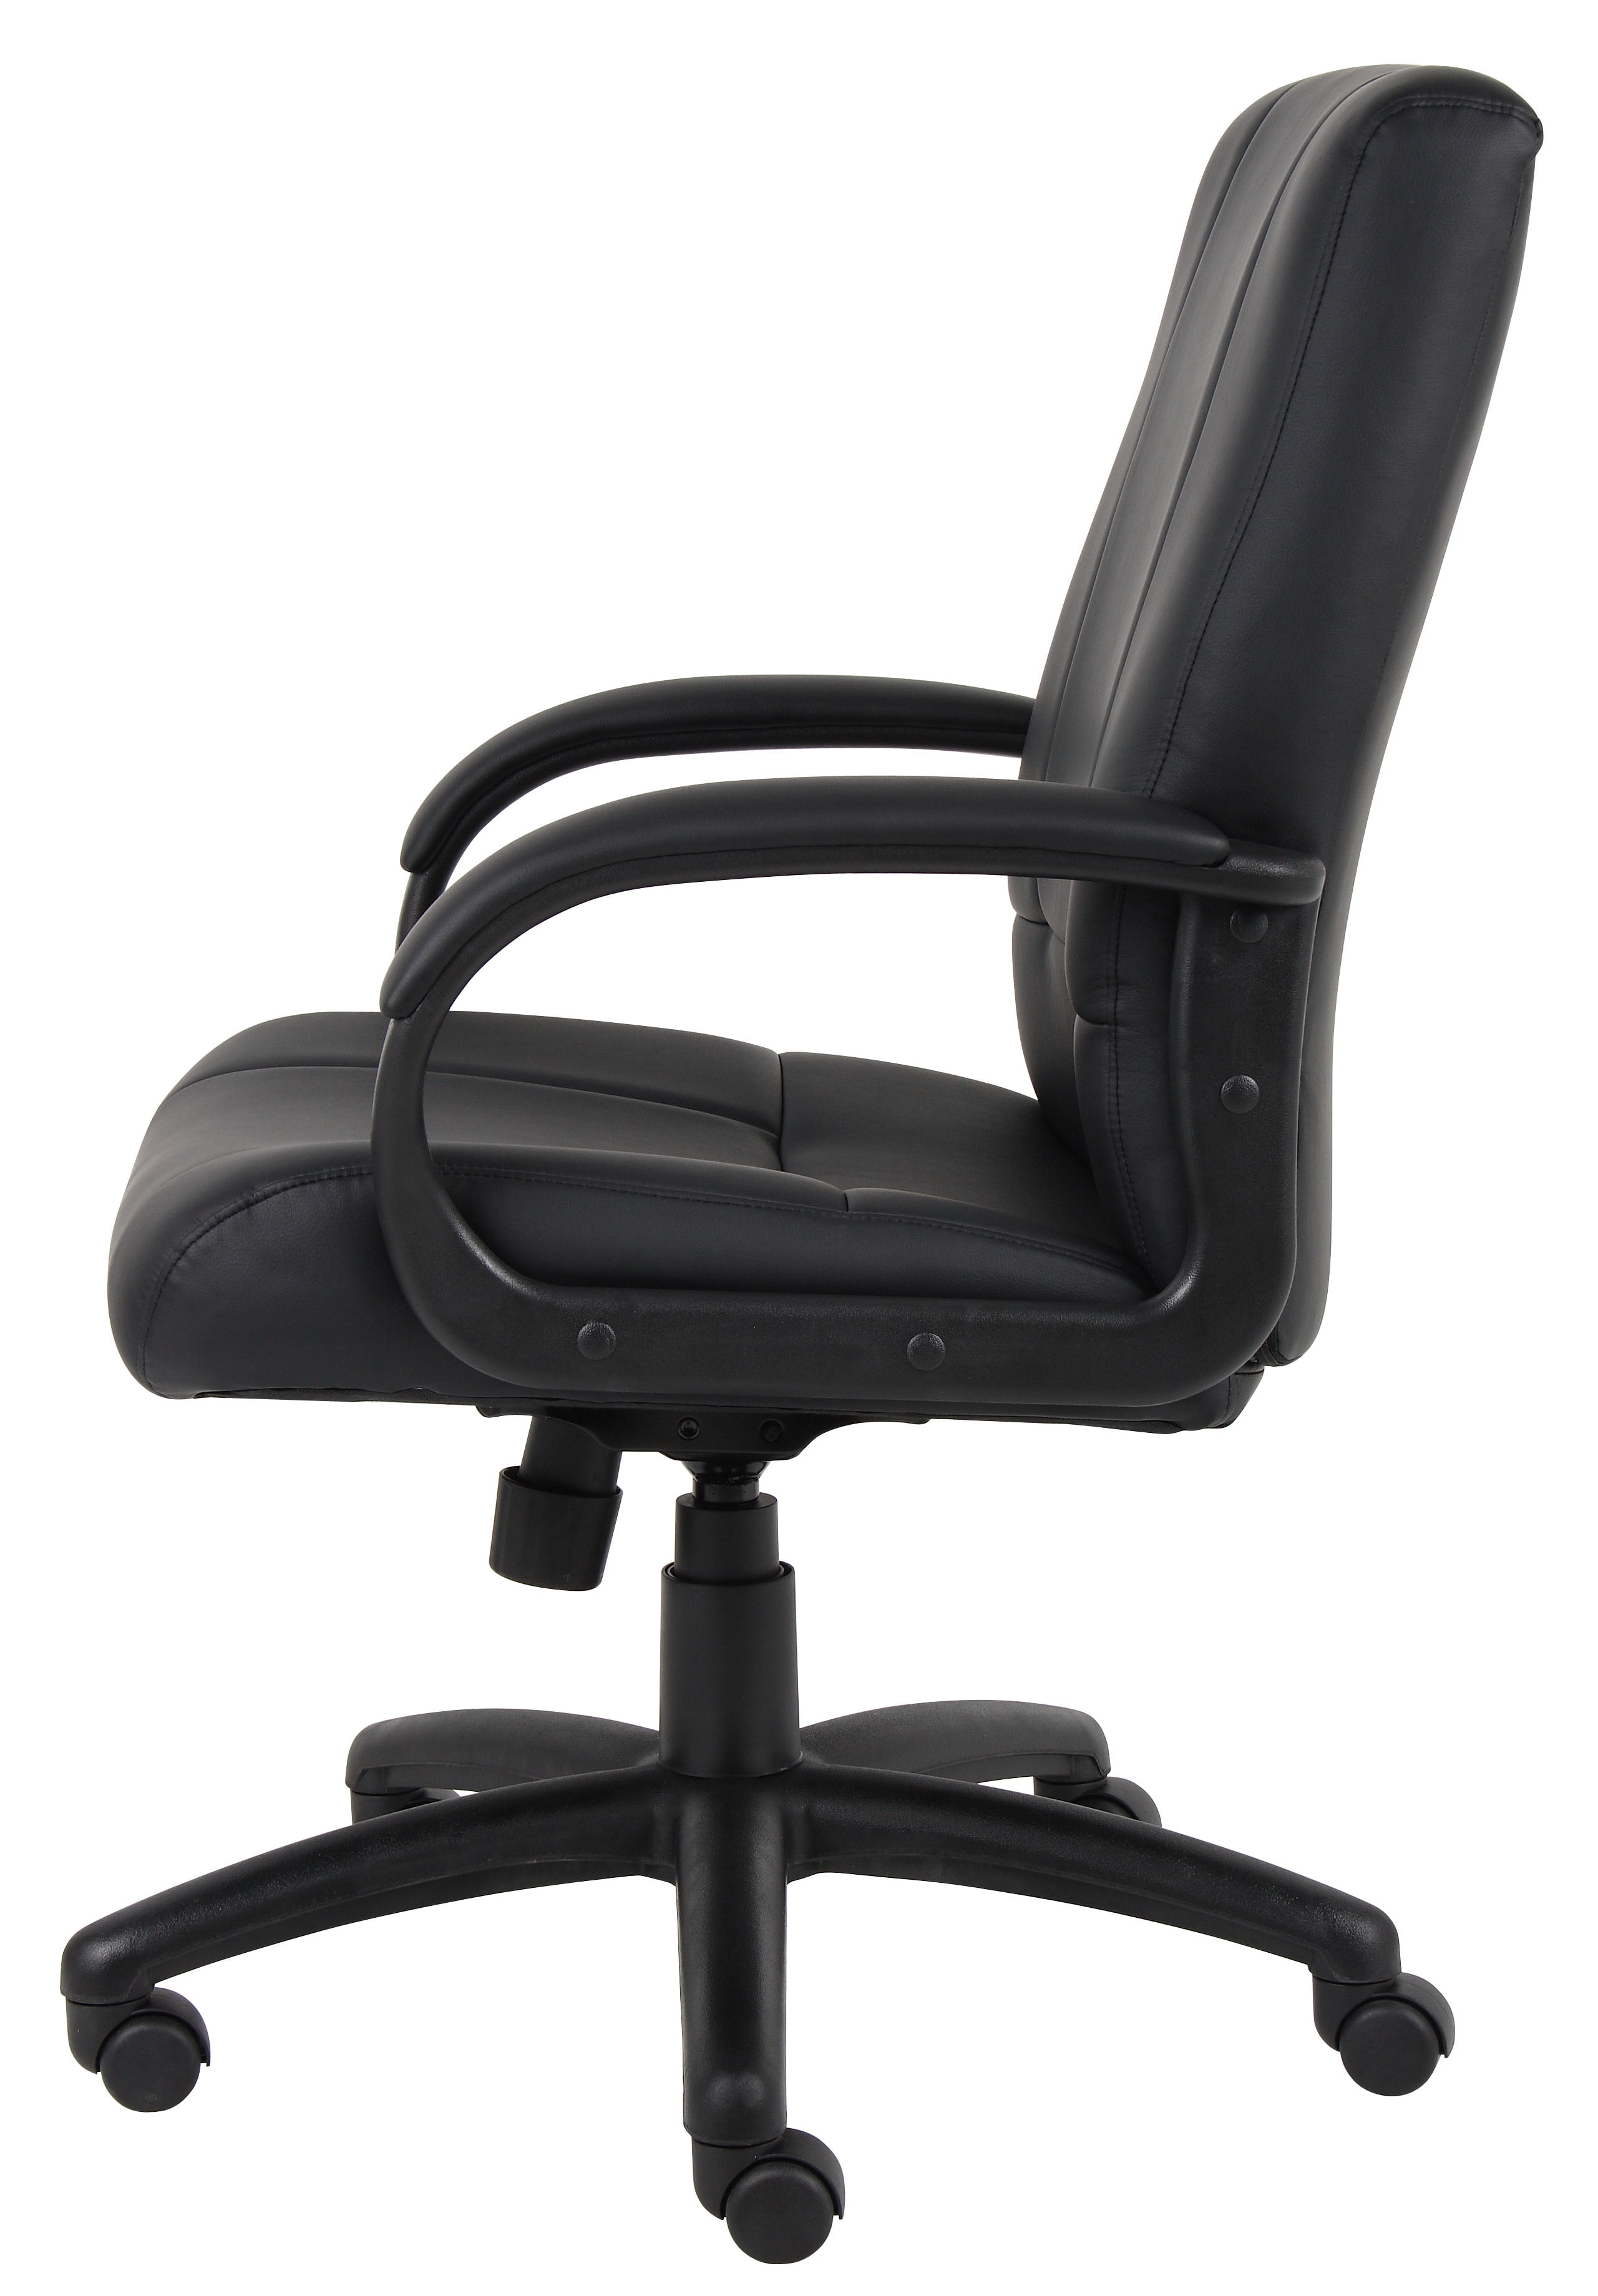 Executive Mid Back Pillow Top Chair Black - Boss Office Products